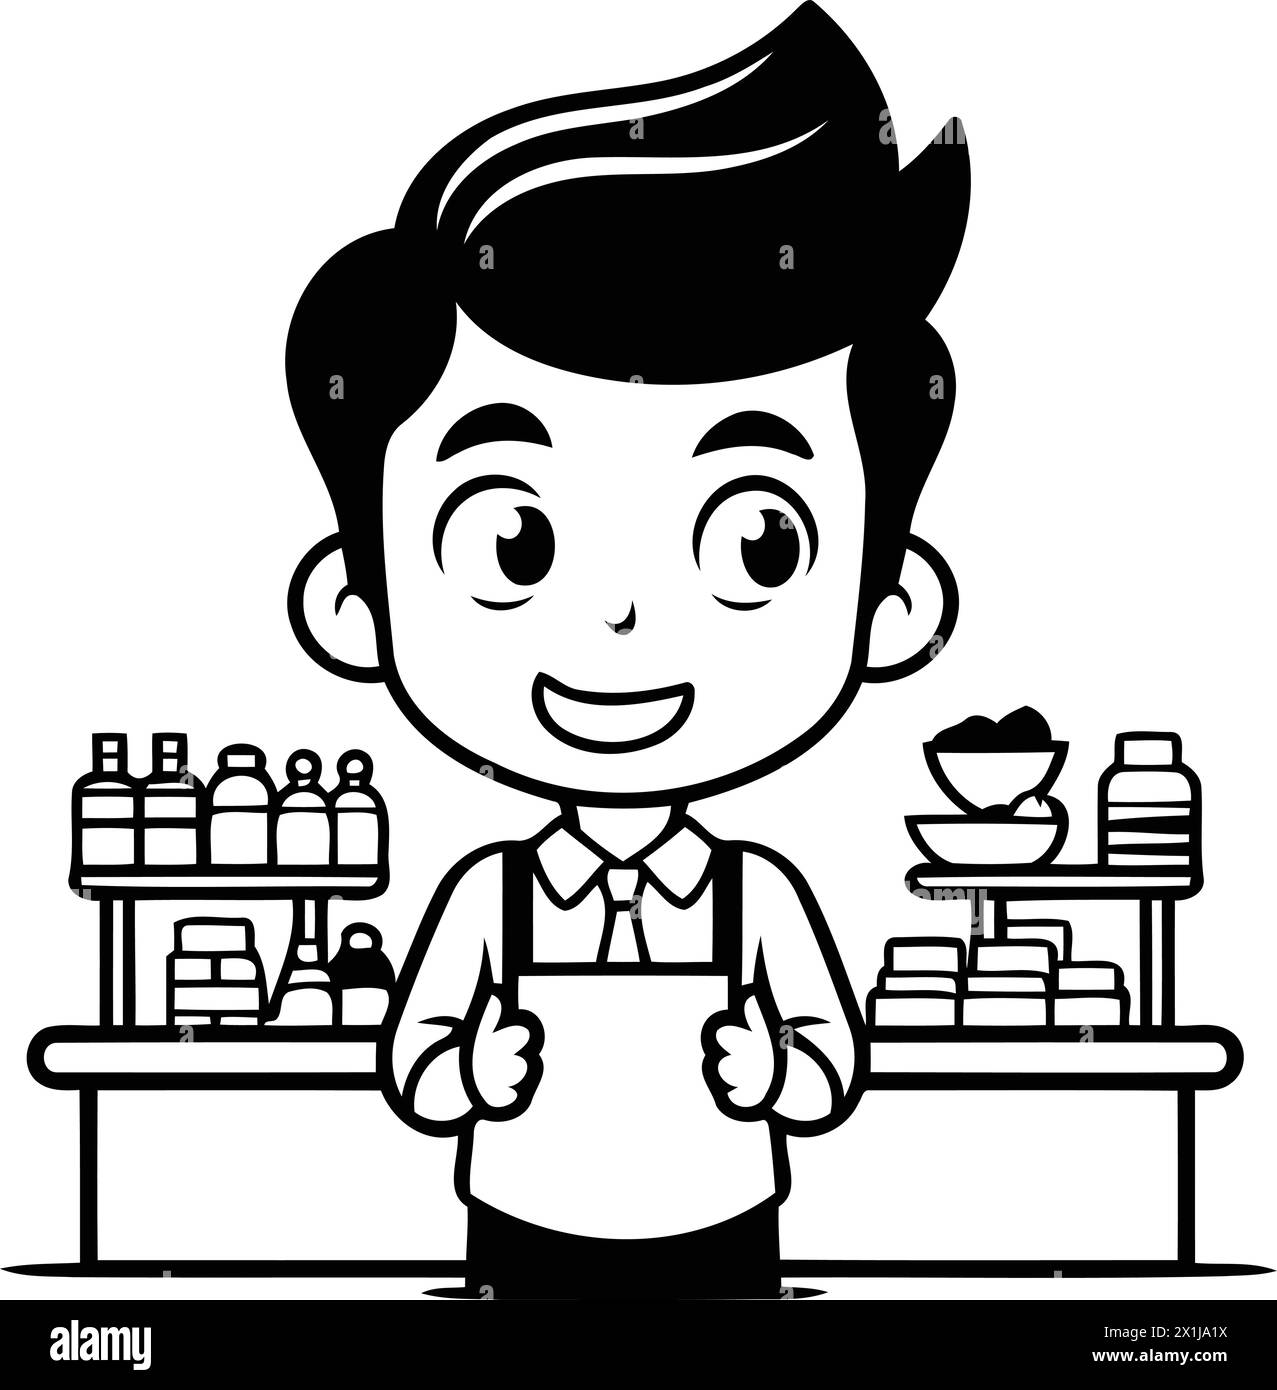 Bartender at work cartoon character vector illustration graphic design on blue background Stock Vector